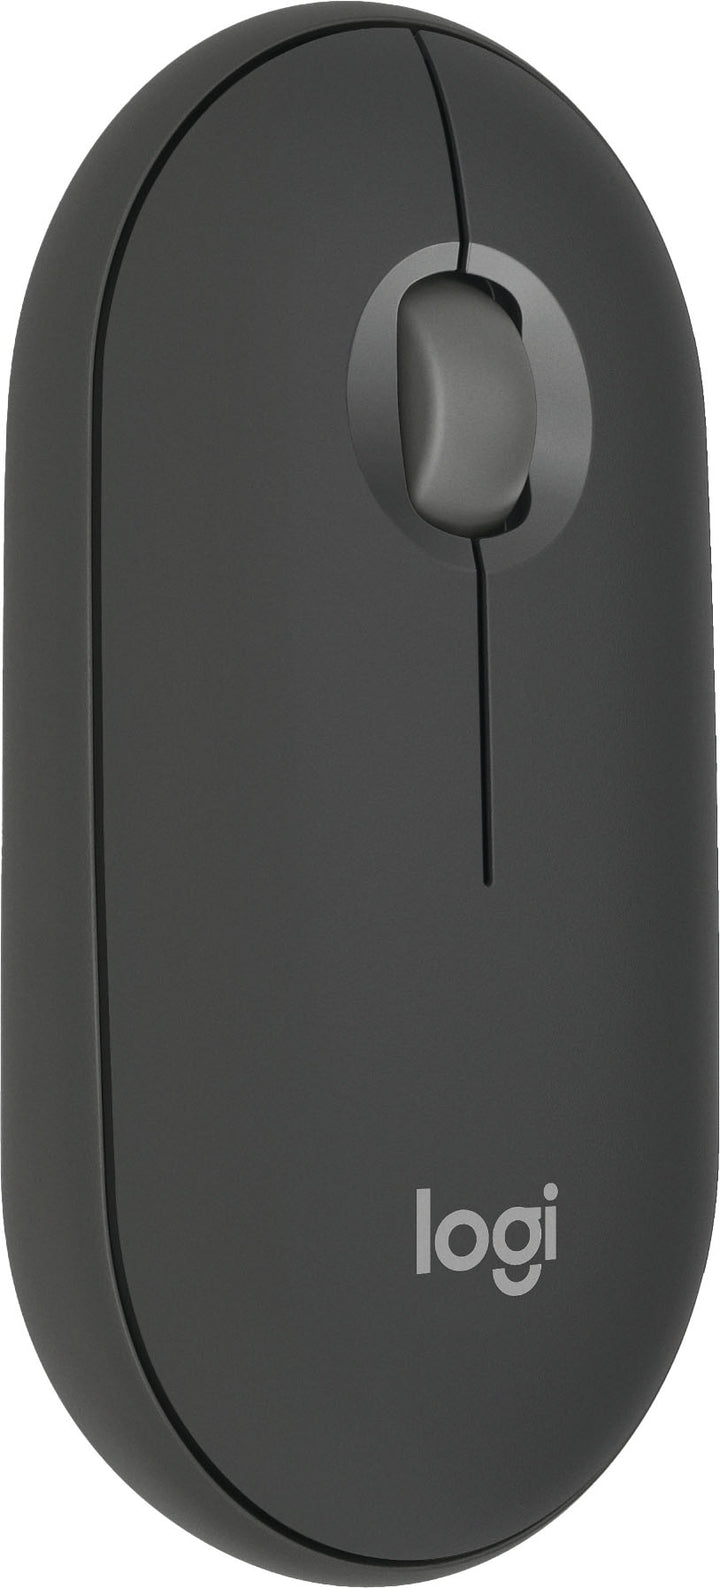 Logitech - Pebble Mouse 2 M350s Slim Lightweight Wireless Silent Ambidextrous Mouse with Customizable Buttons - Graphite_0